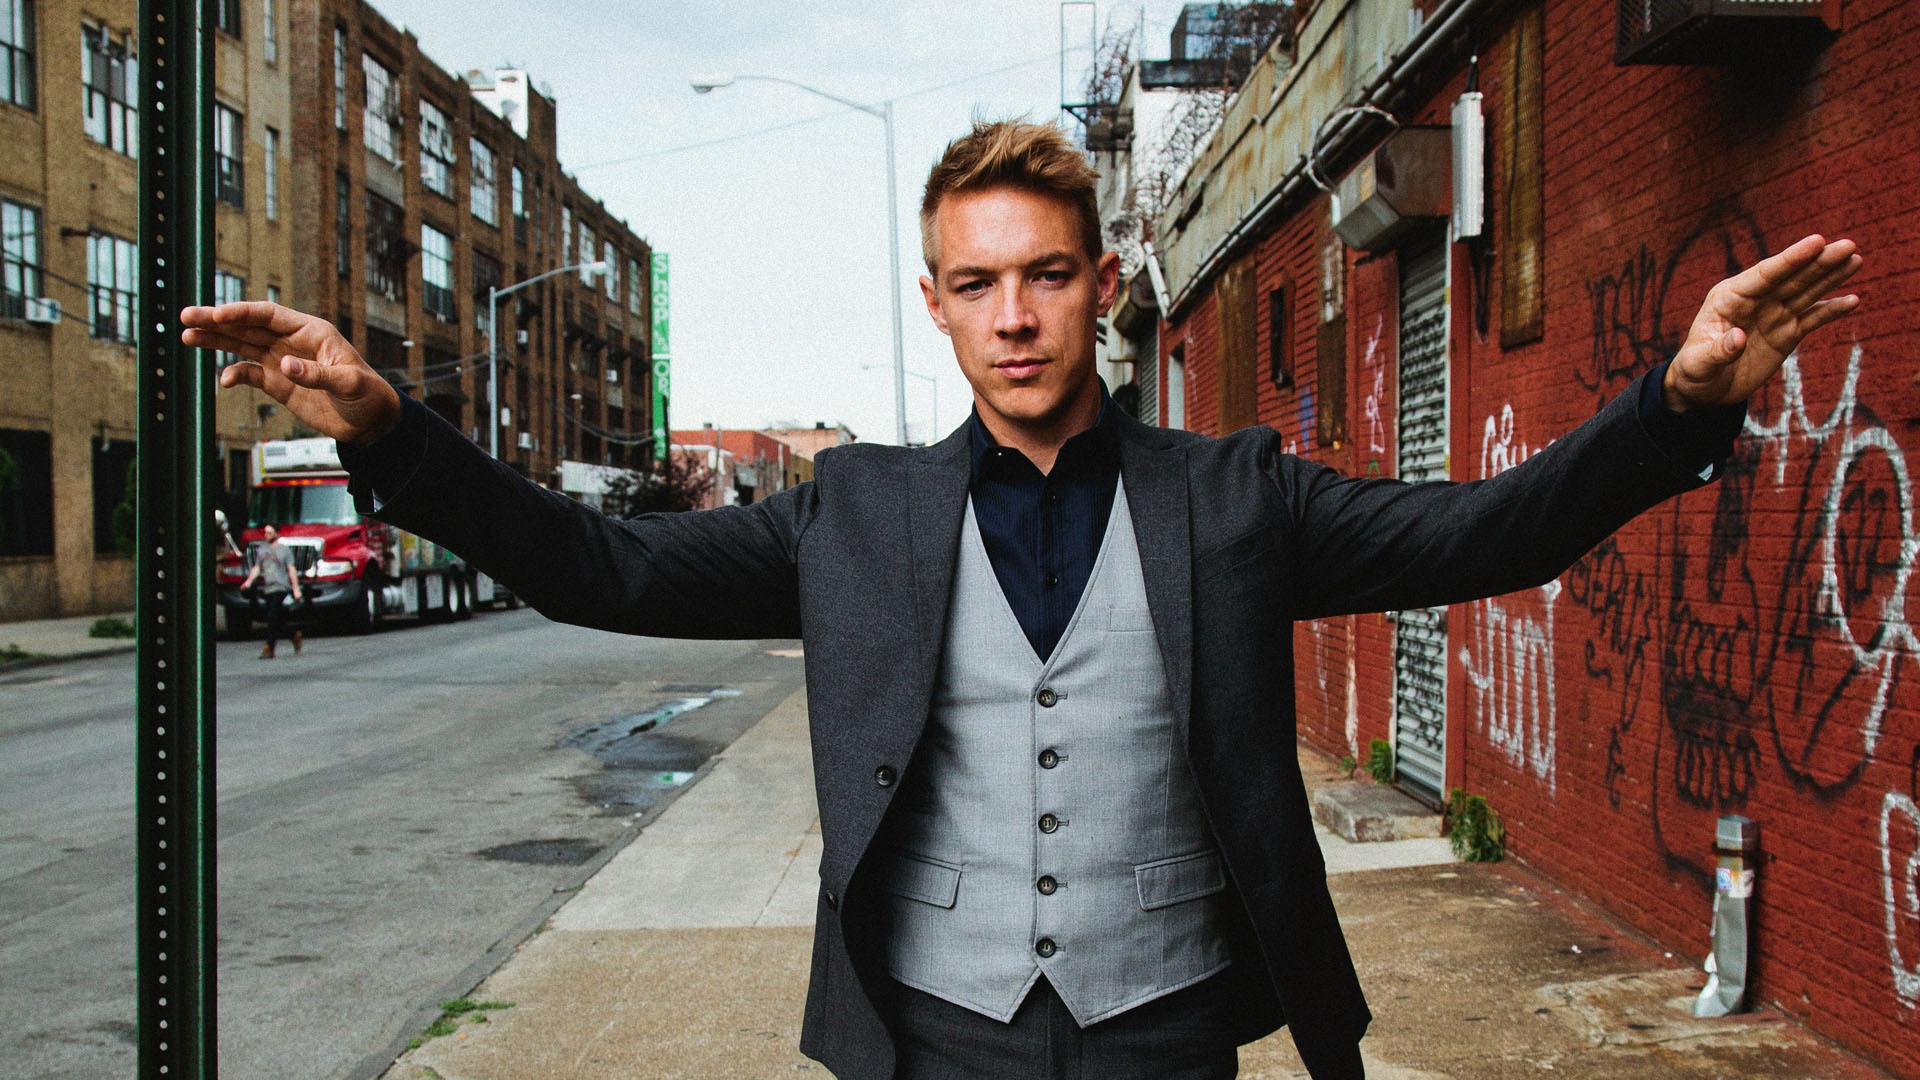 World Renowned DJ Diplo to Perform During Spring Break at Sharky’s